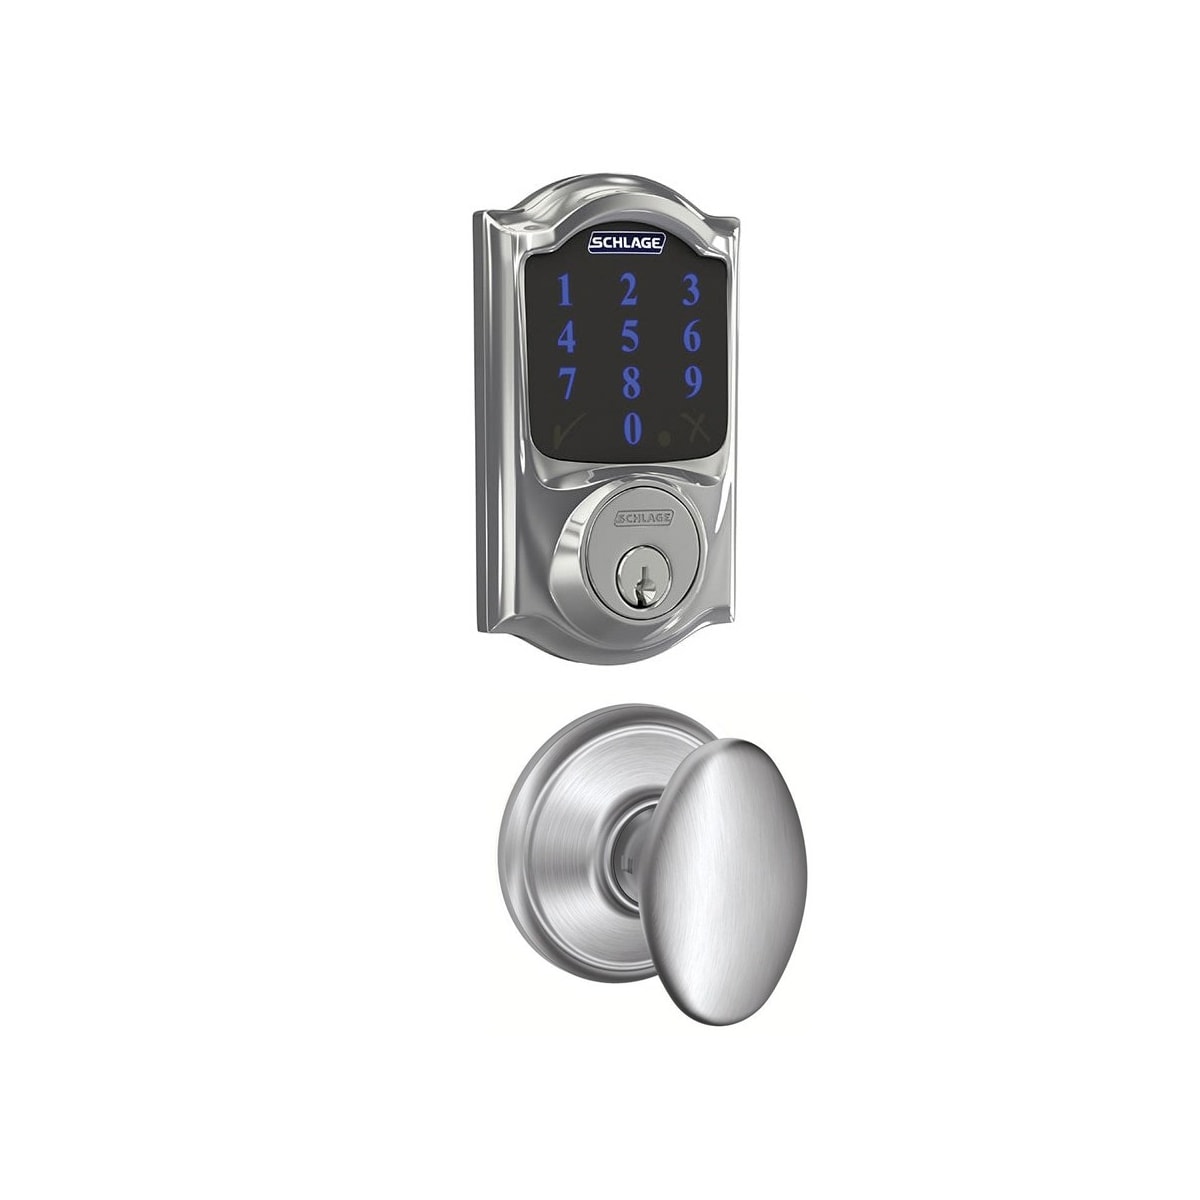 Schlage (Allegion) LE Electronic locking device Specifications